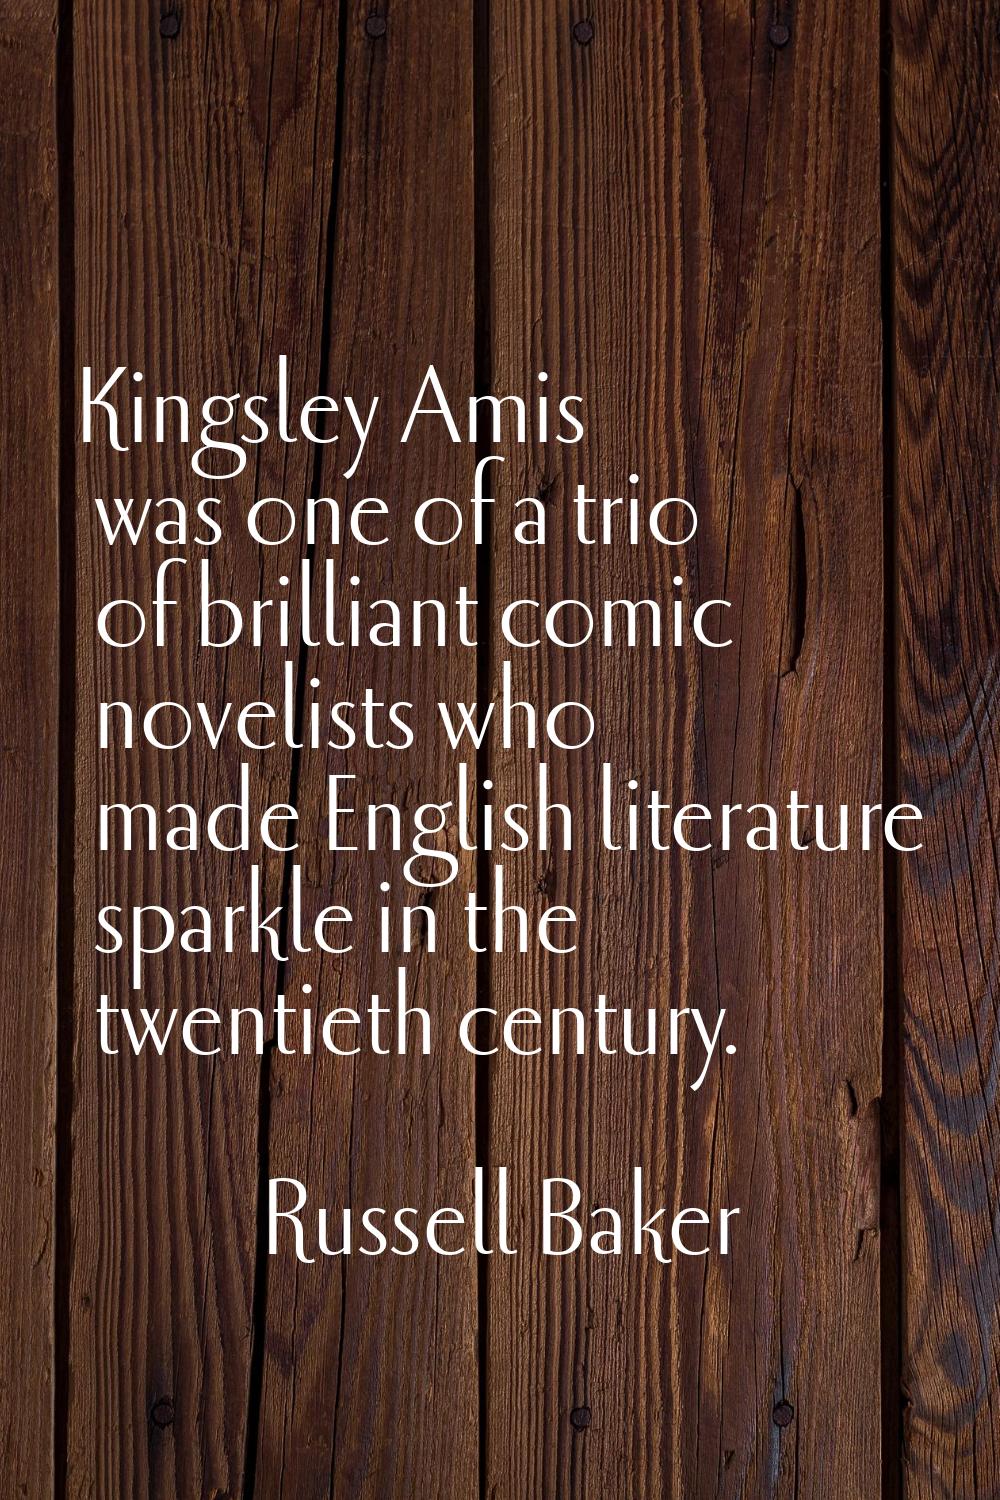 Kingsley Amis was one of a trio of brilliant comic novelists who made English literature sparkle in